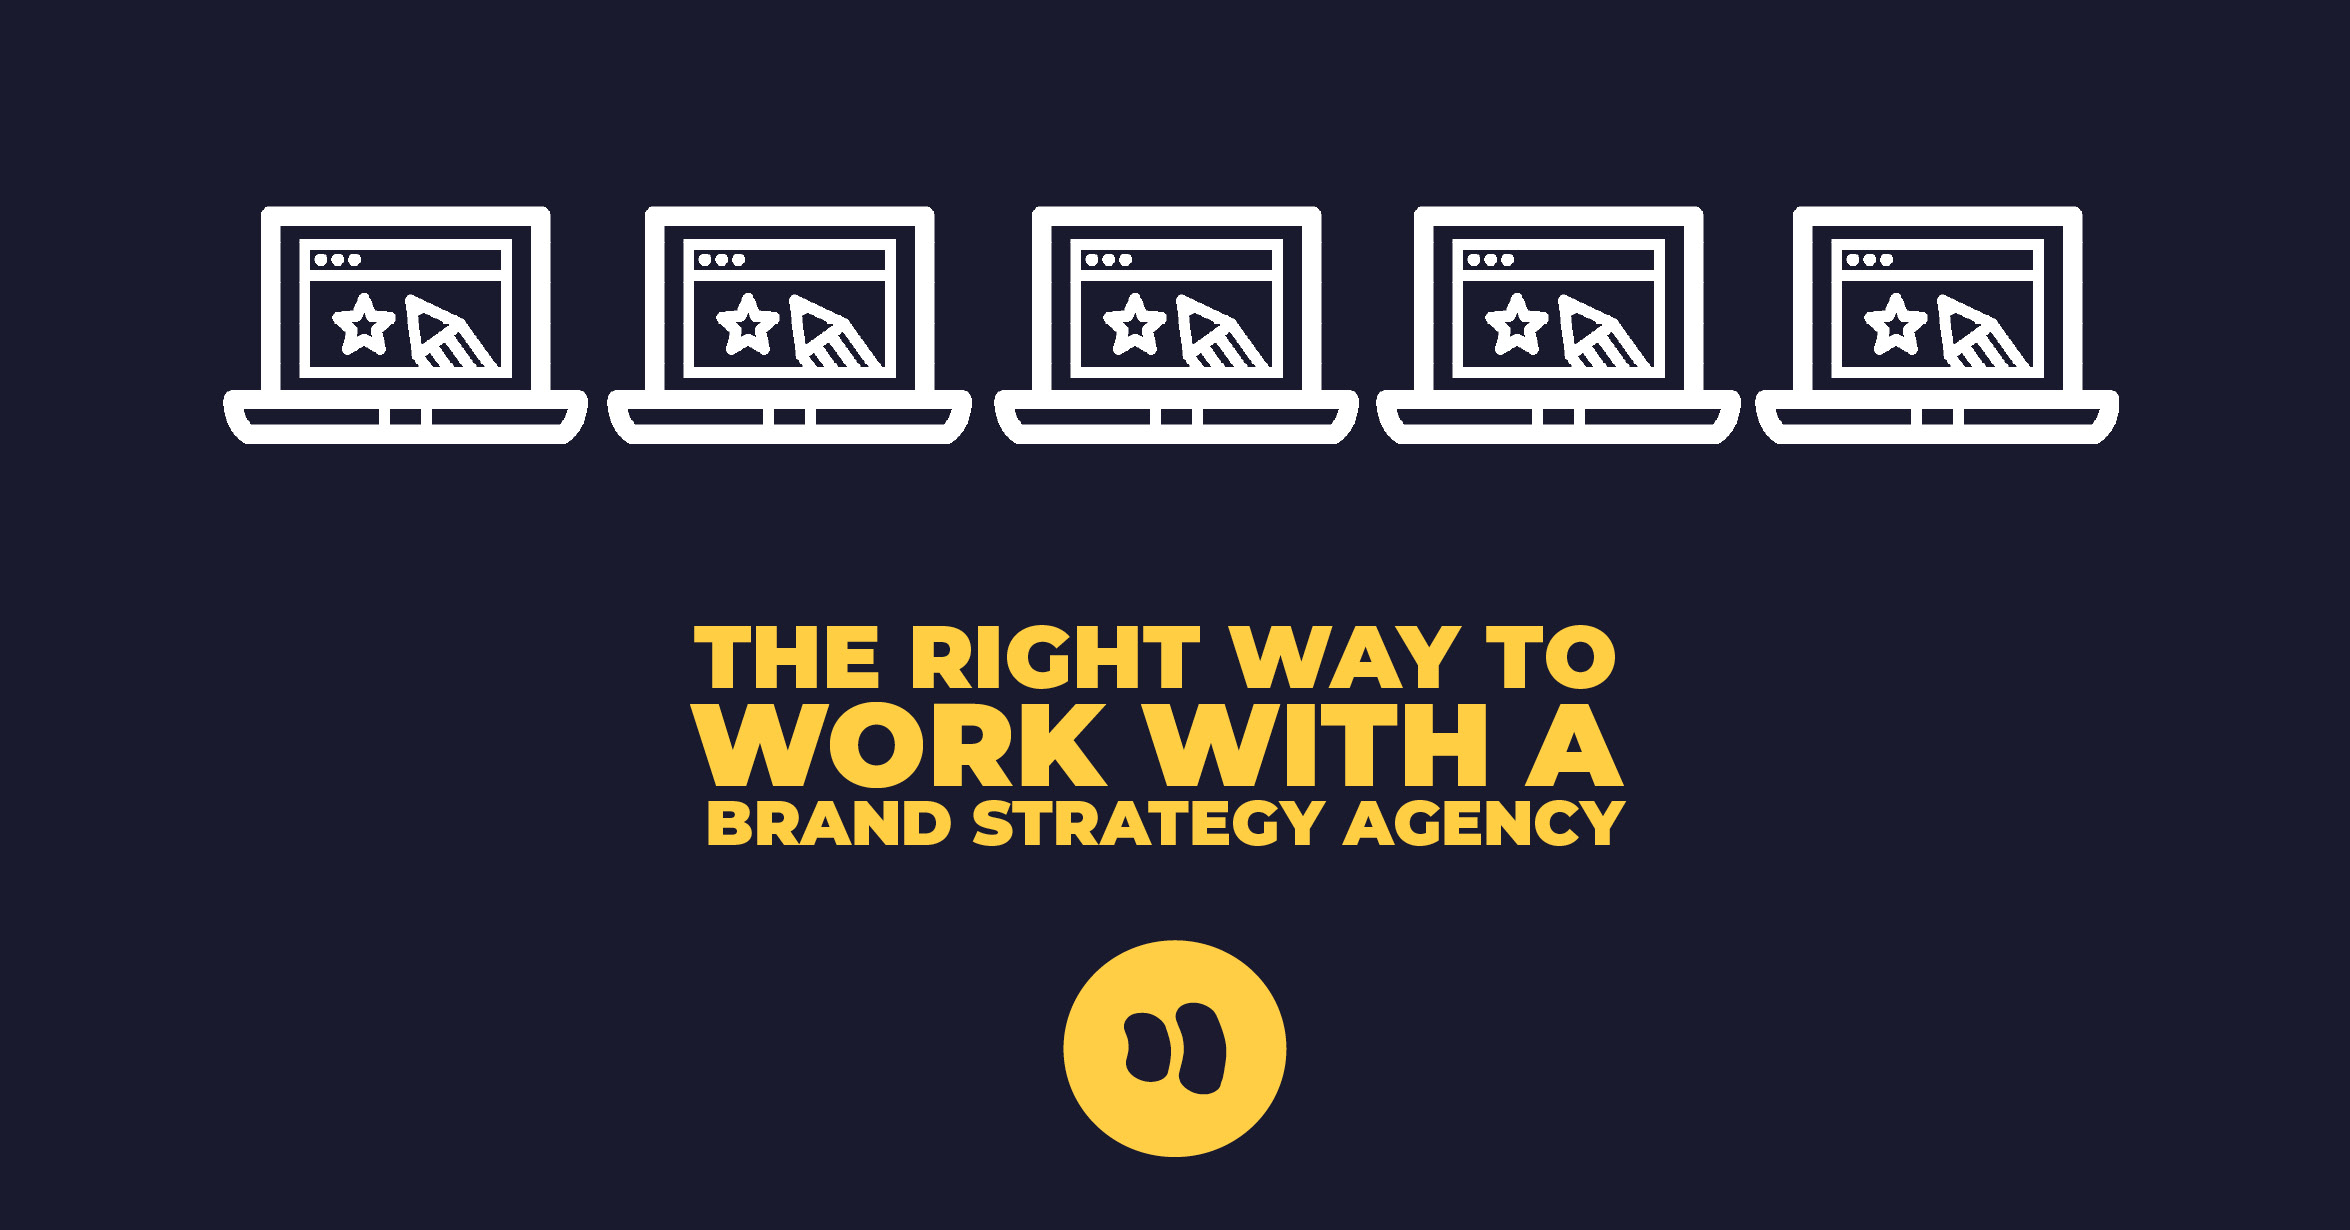 The Right Way to Work with a Brand Strategy Agency